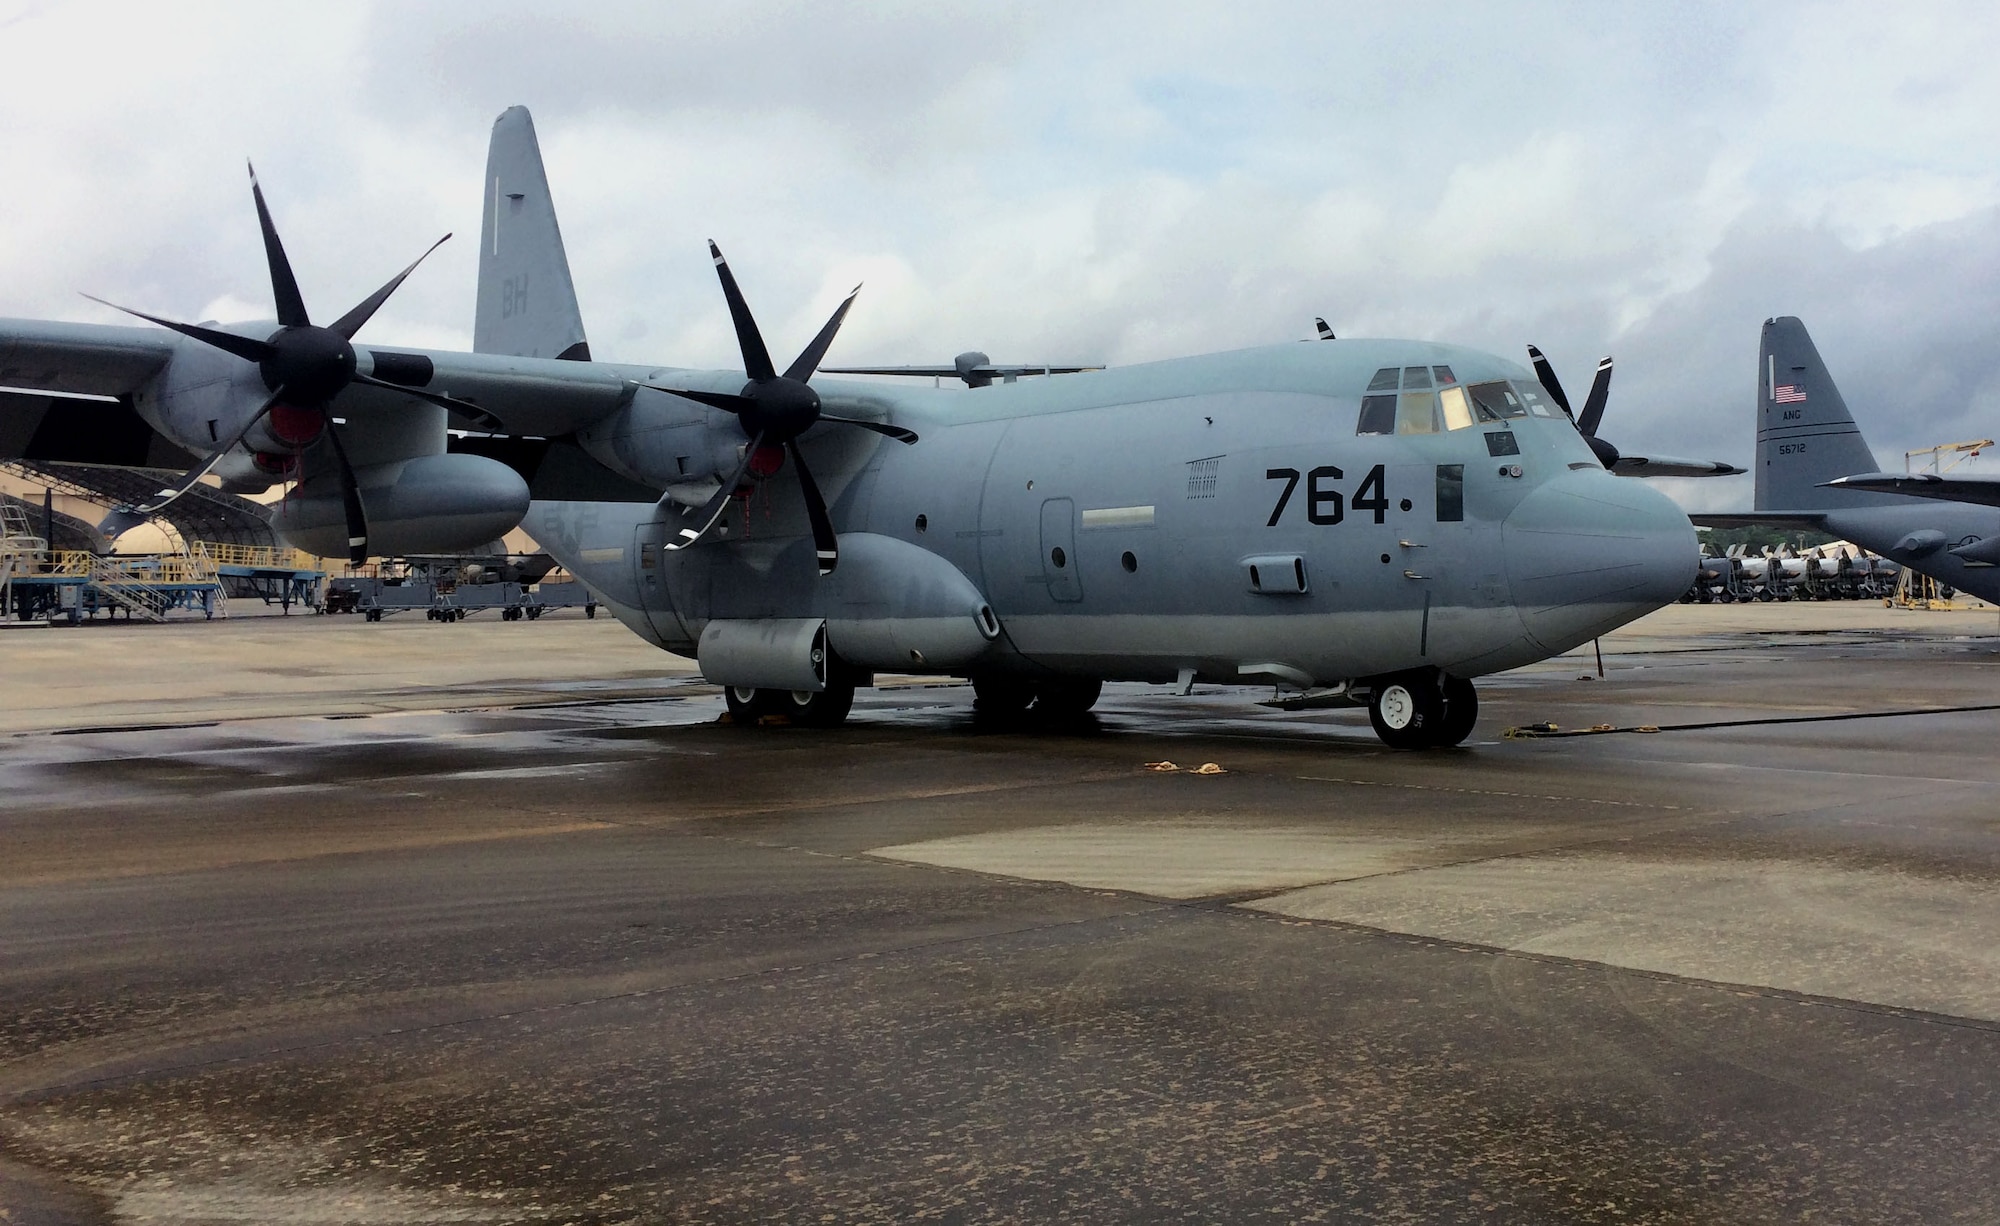 First U.S. Navy C-130 airframe has arrived at Robins Air Force Base under new workload